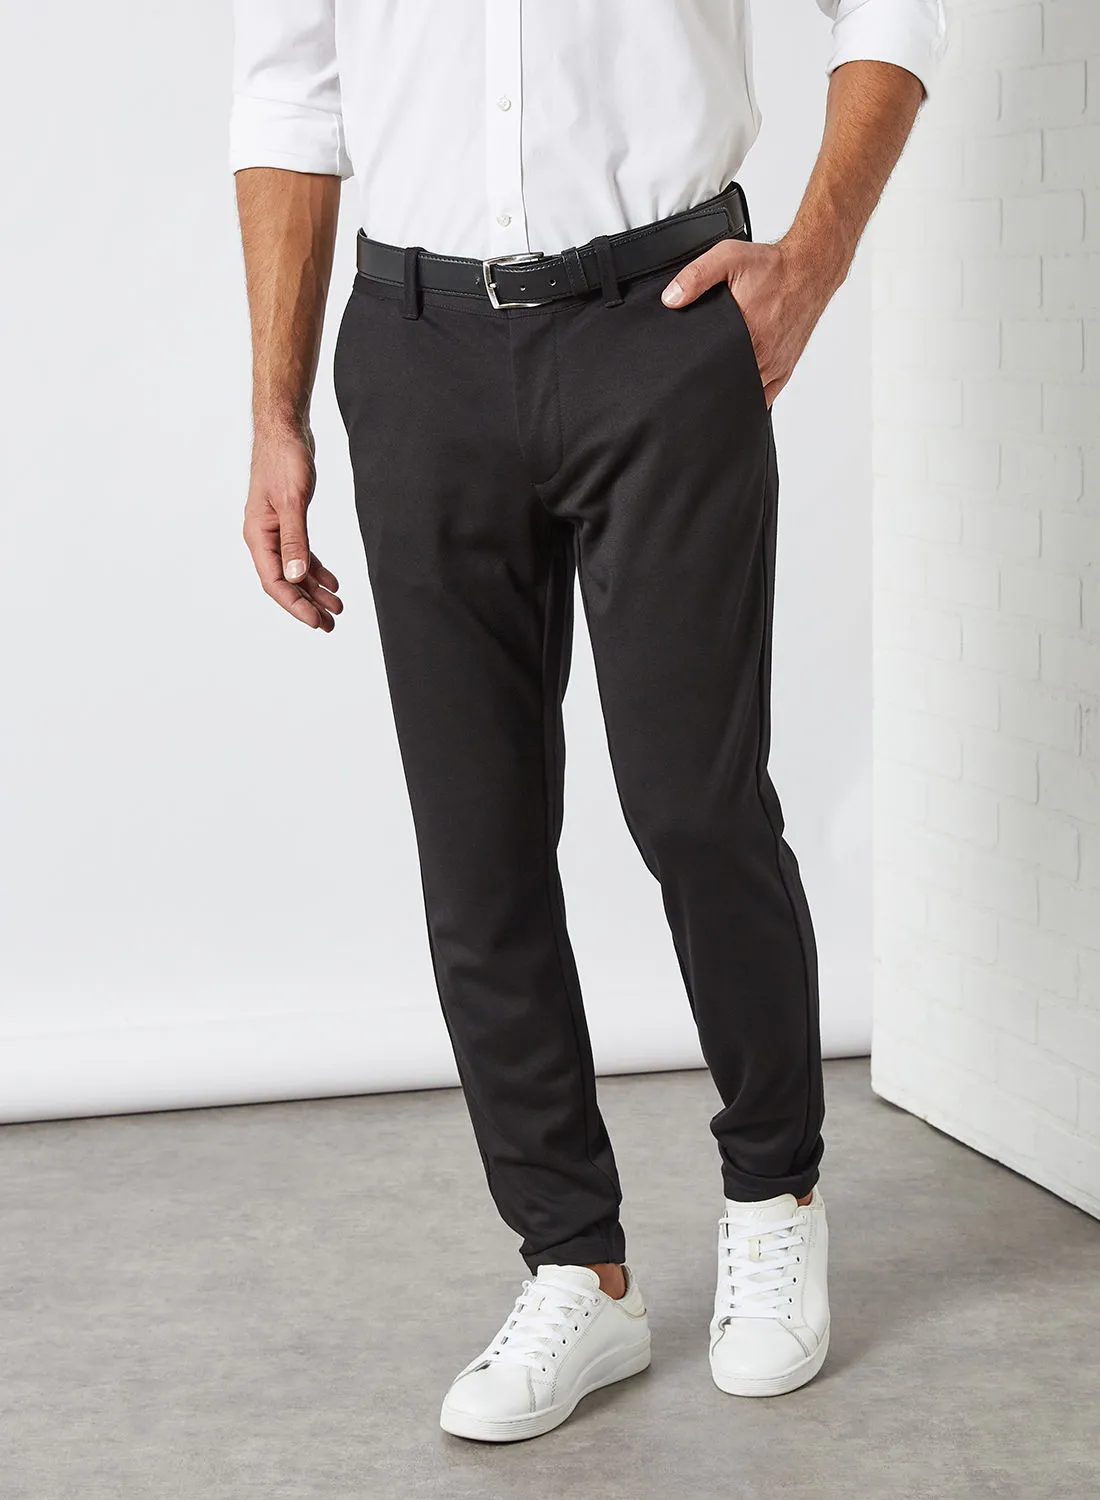 ONLY & SONS Mark Chino Pants أسود